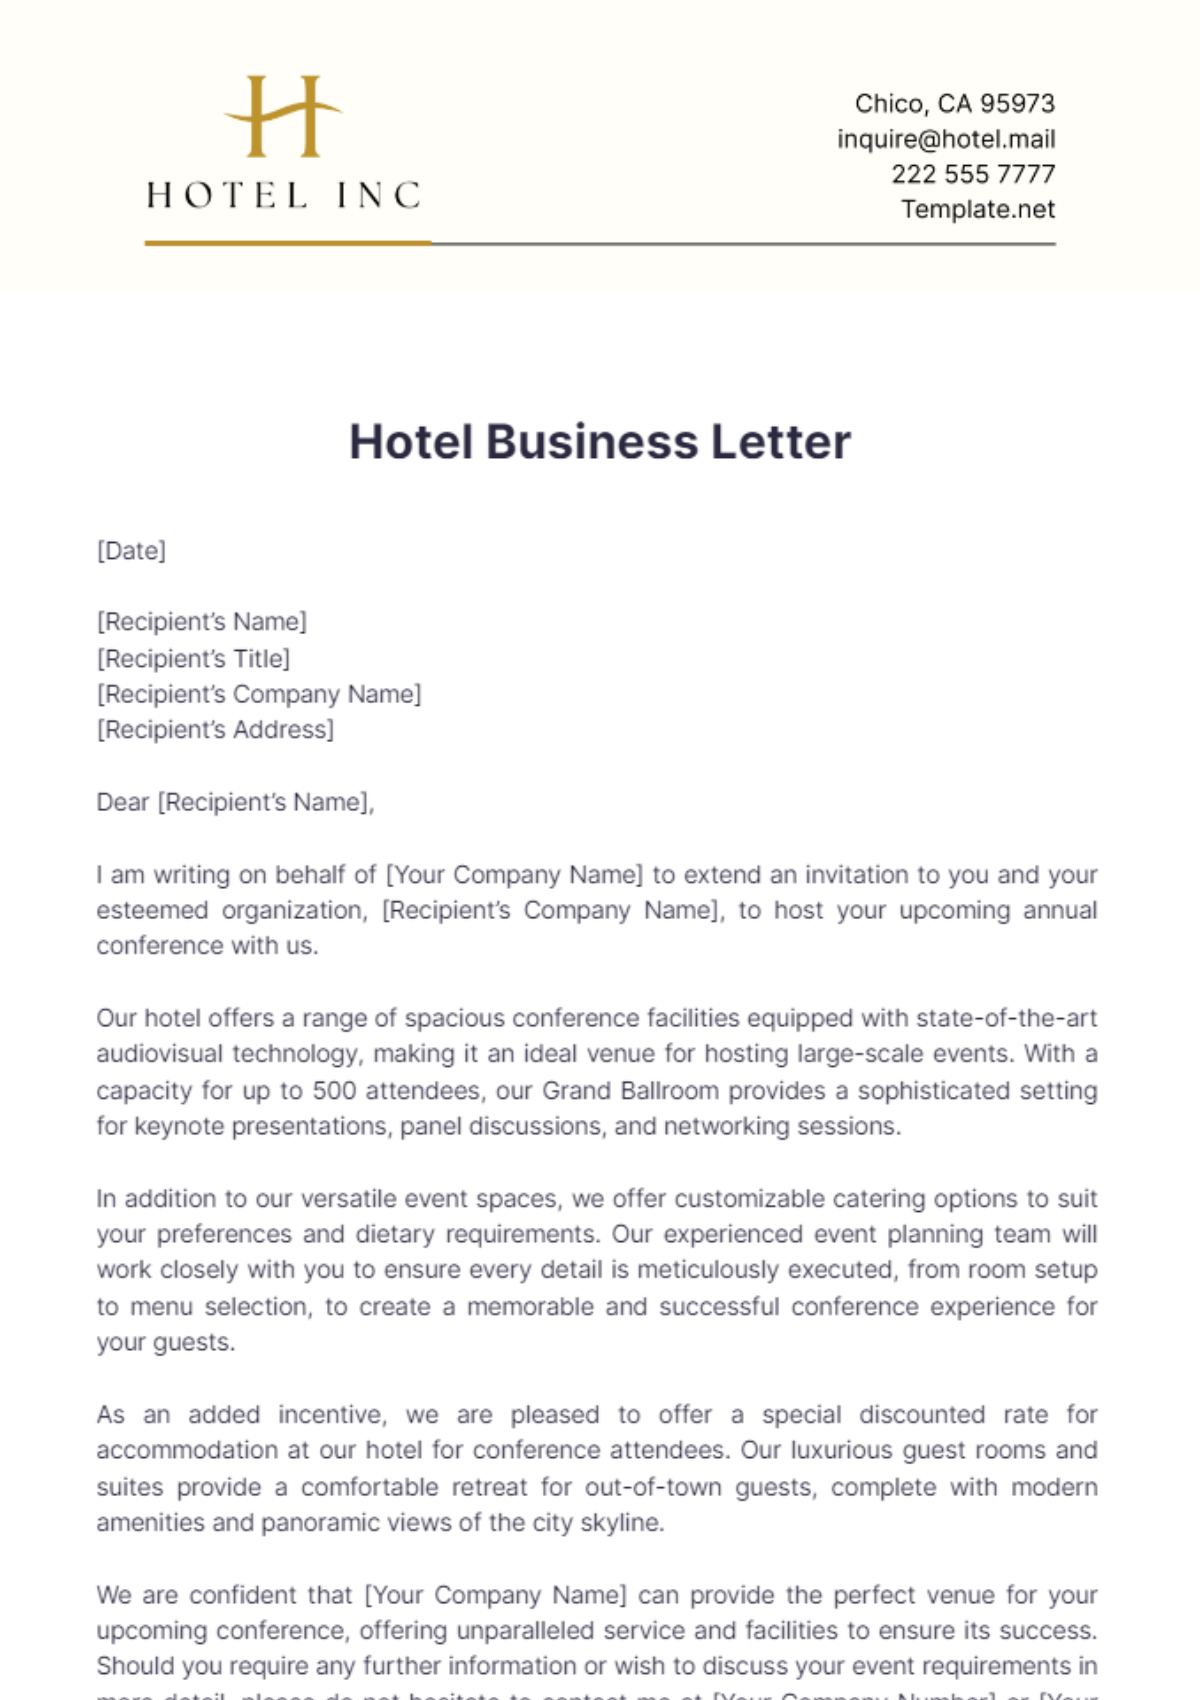 Hotel Business Letter Template